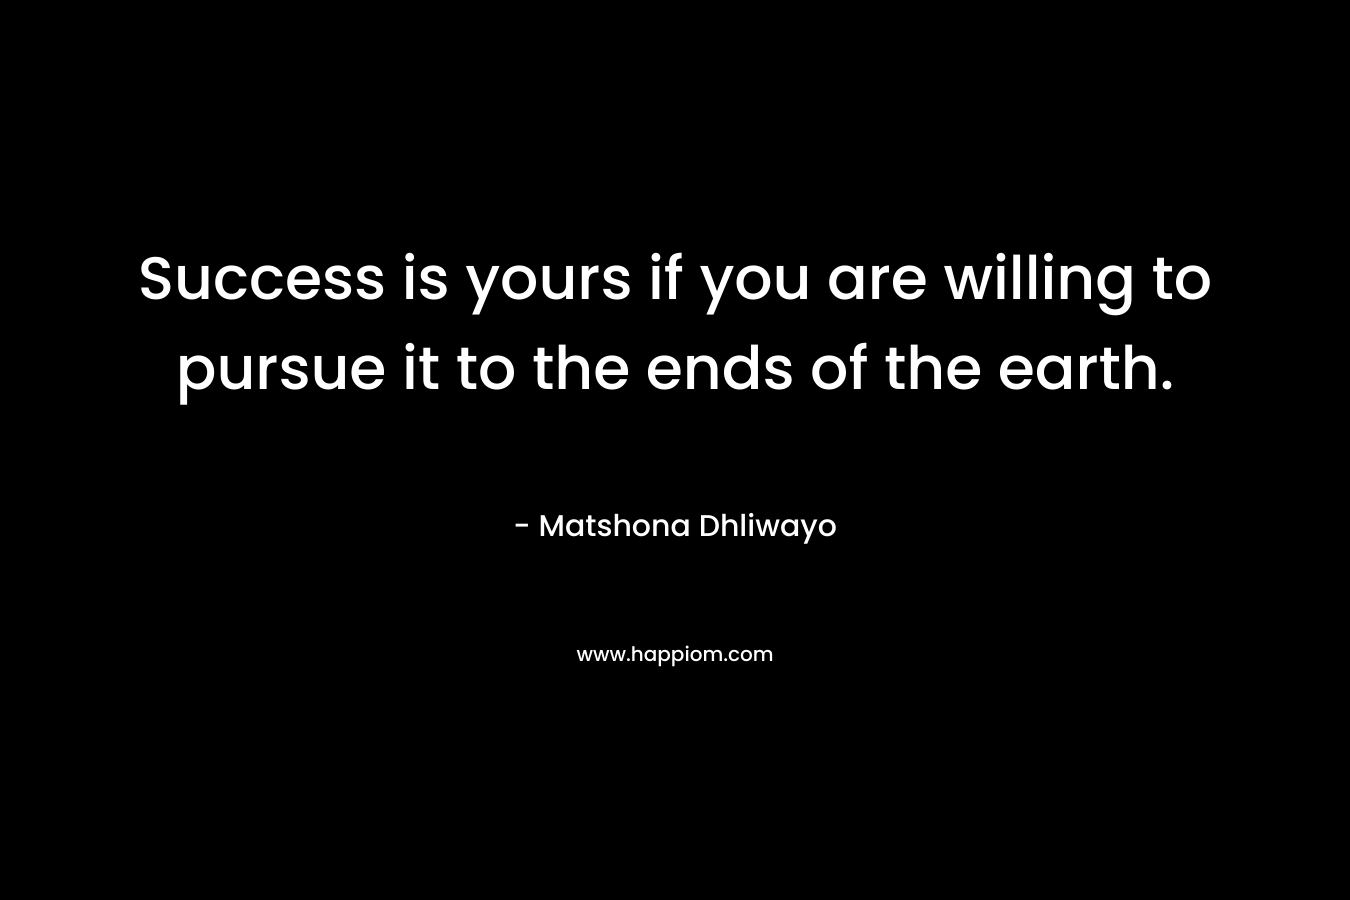 Success is yours if you are willing to pursue it to the ends of the earth.